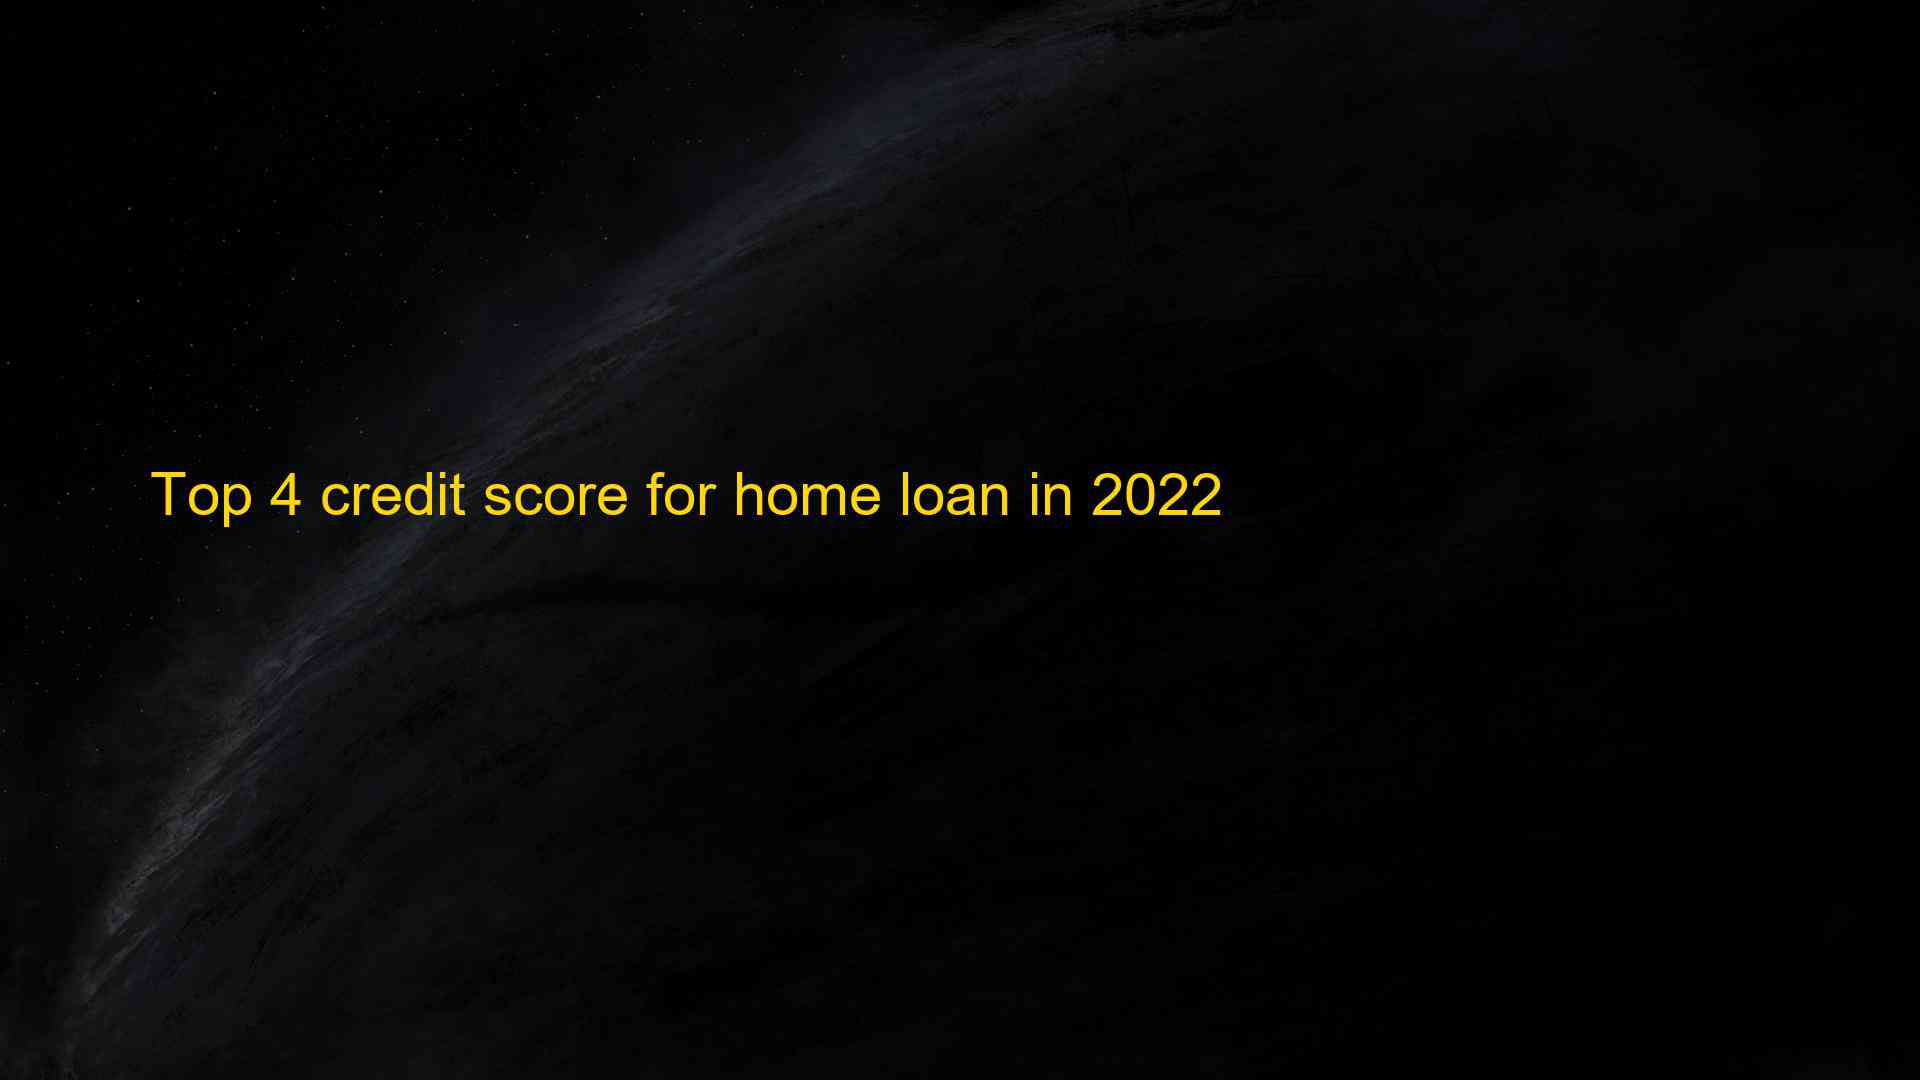 Top 4 credit score for home loan in 2022 1660195753